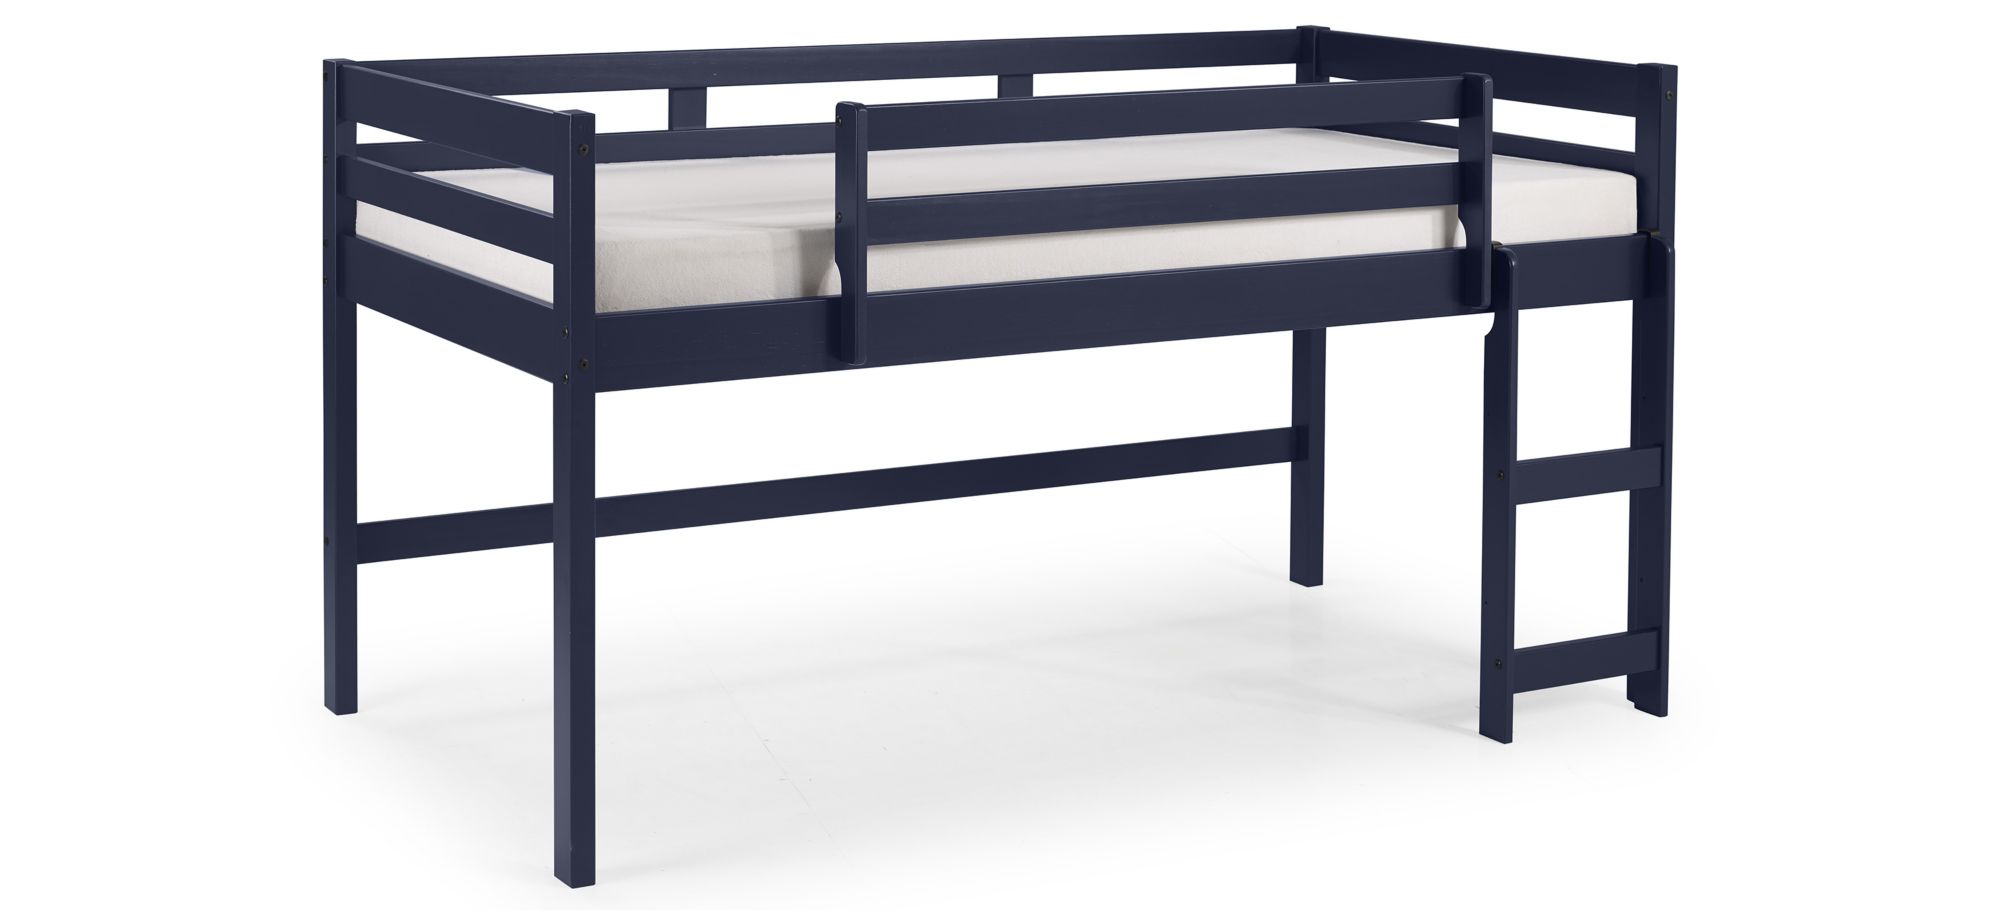 Lara Loft Bed in Navy Blue Finish by Acme Furniture Industry